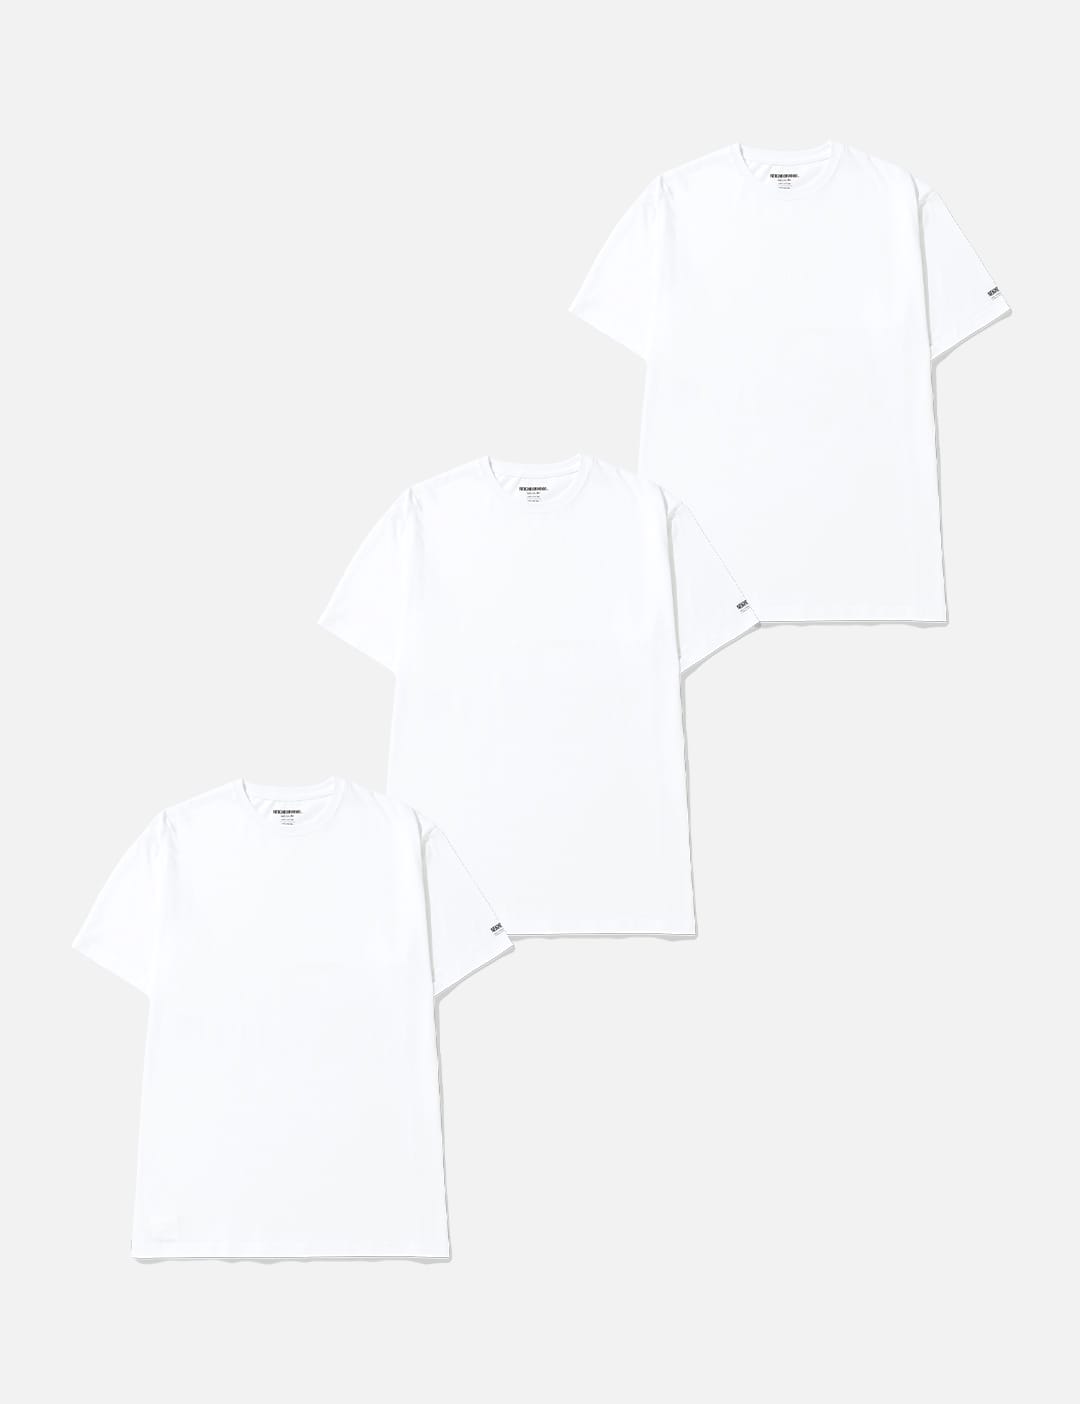 Jacquemus - Jacquemus T-shirt | HBX - Globally Curated Fashion and 